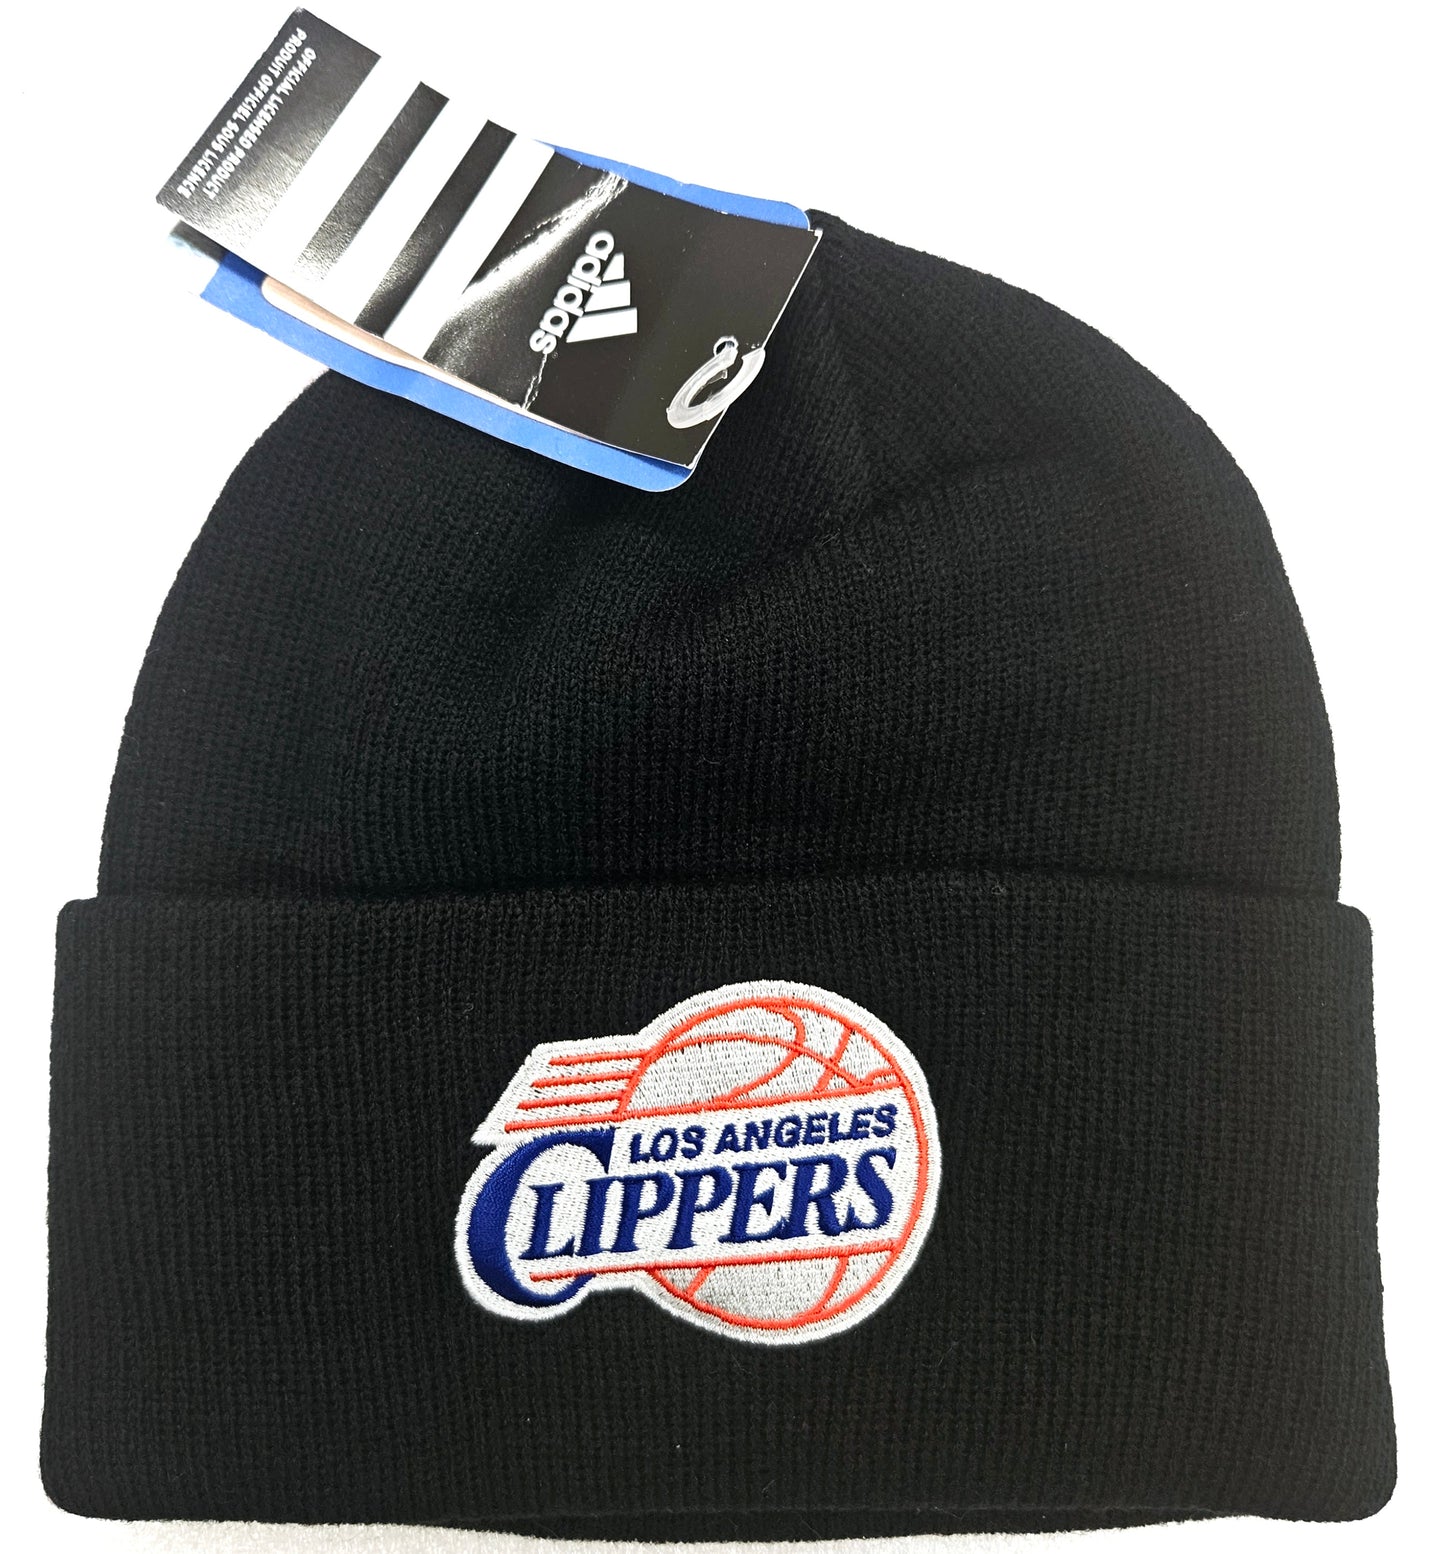 Los Angeles Clippers NBA Black Knit Beanie Hat